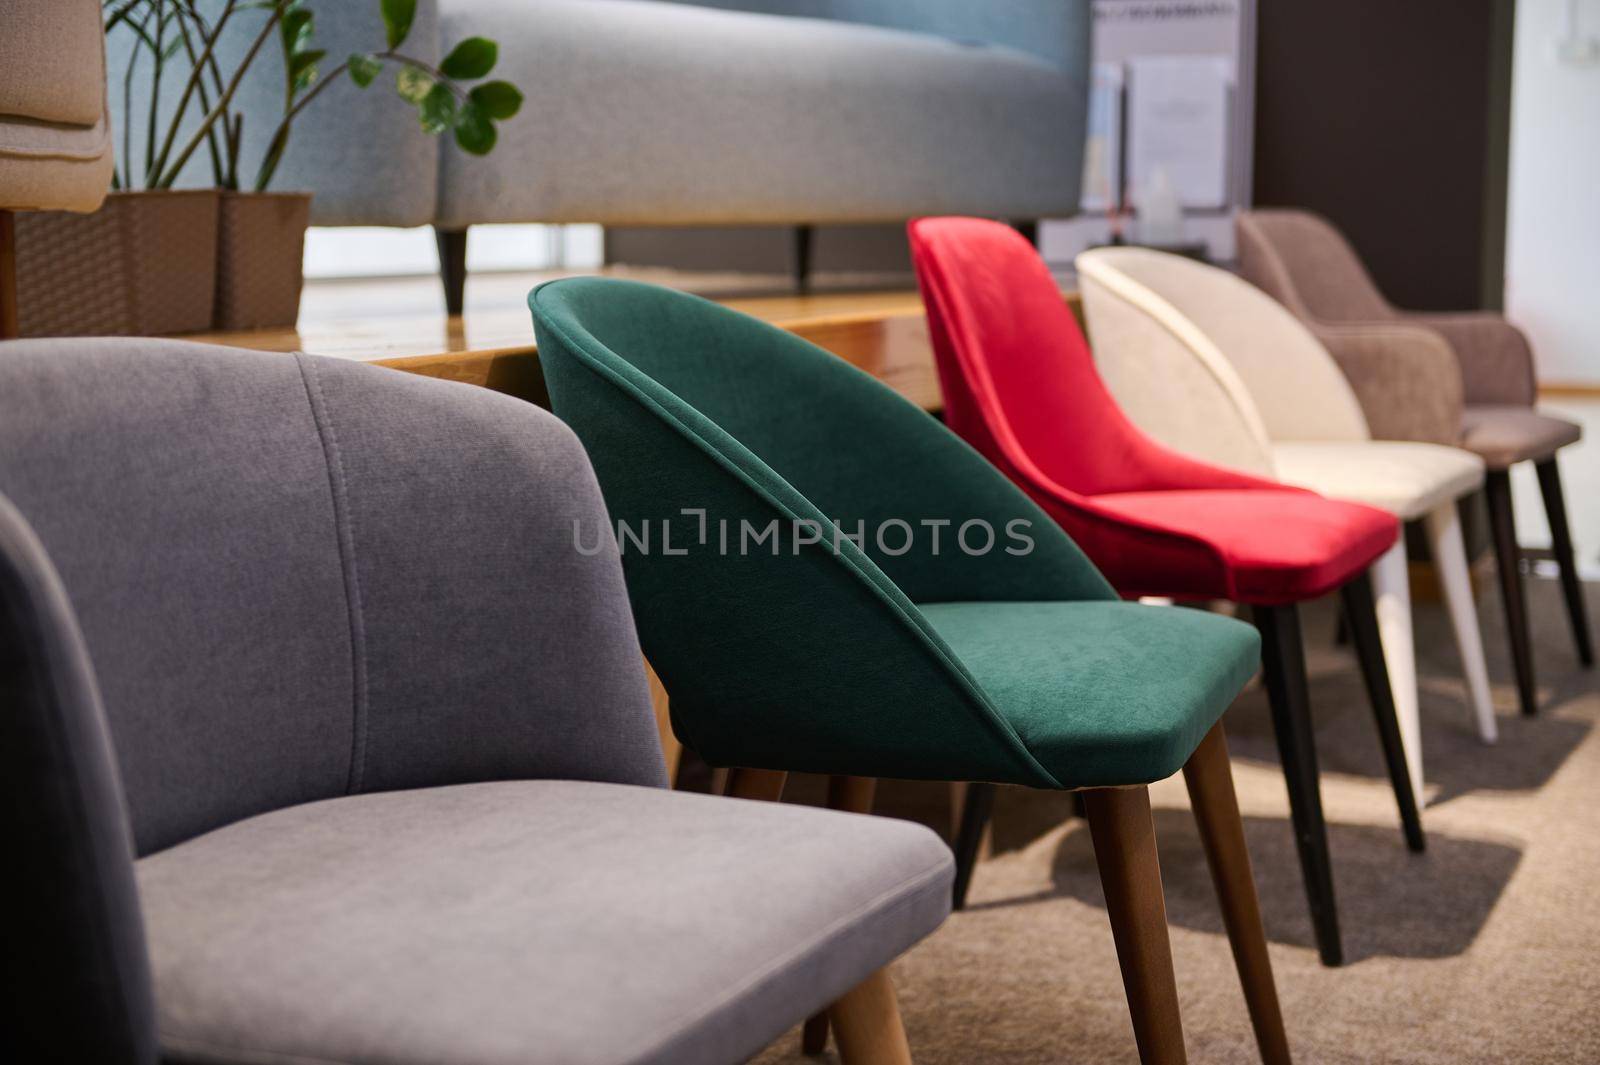 Chairs in salon of furniture. Showroom, exhibition hall of modern soft furniture, upholstered furnitures